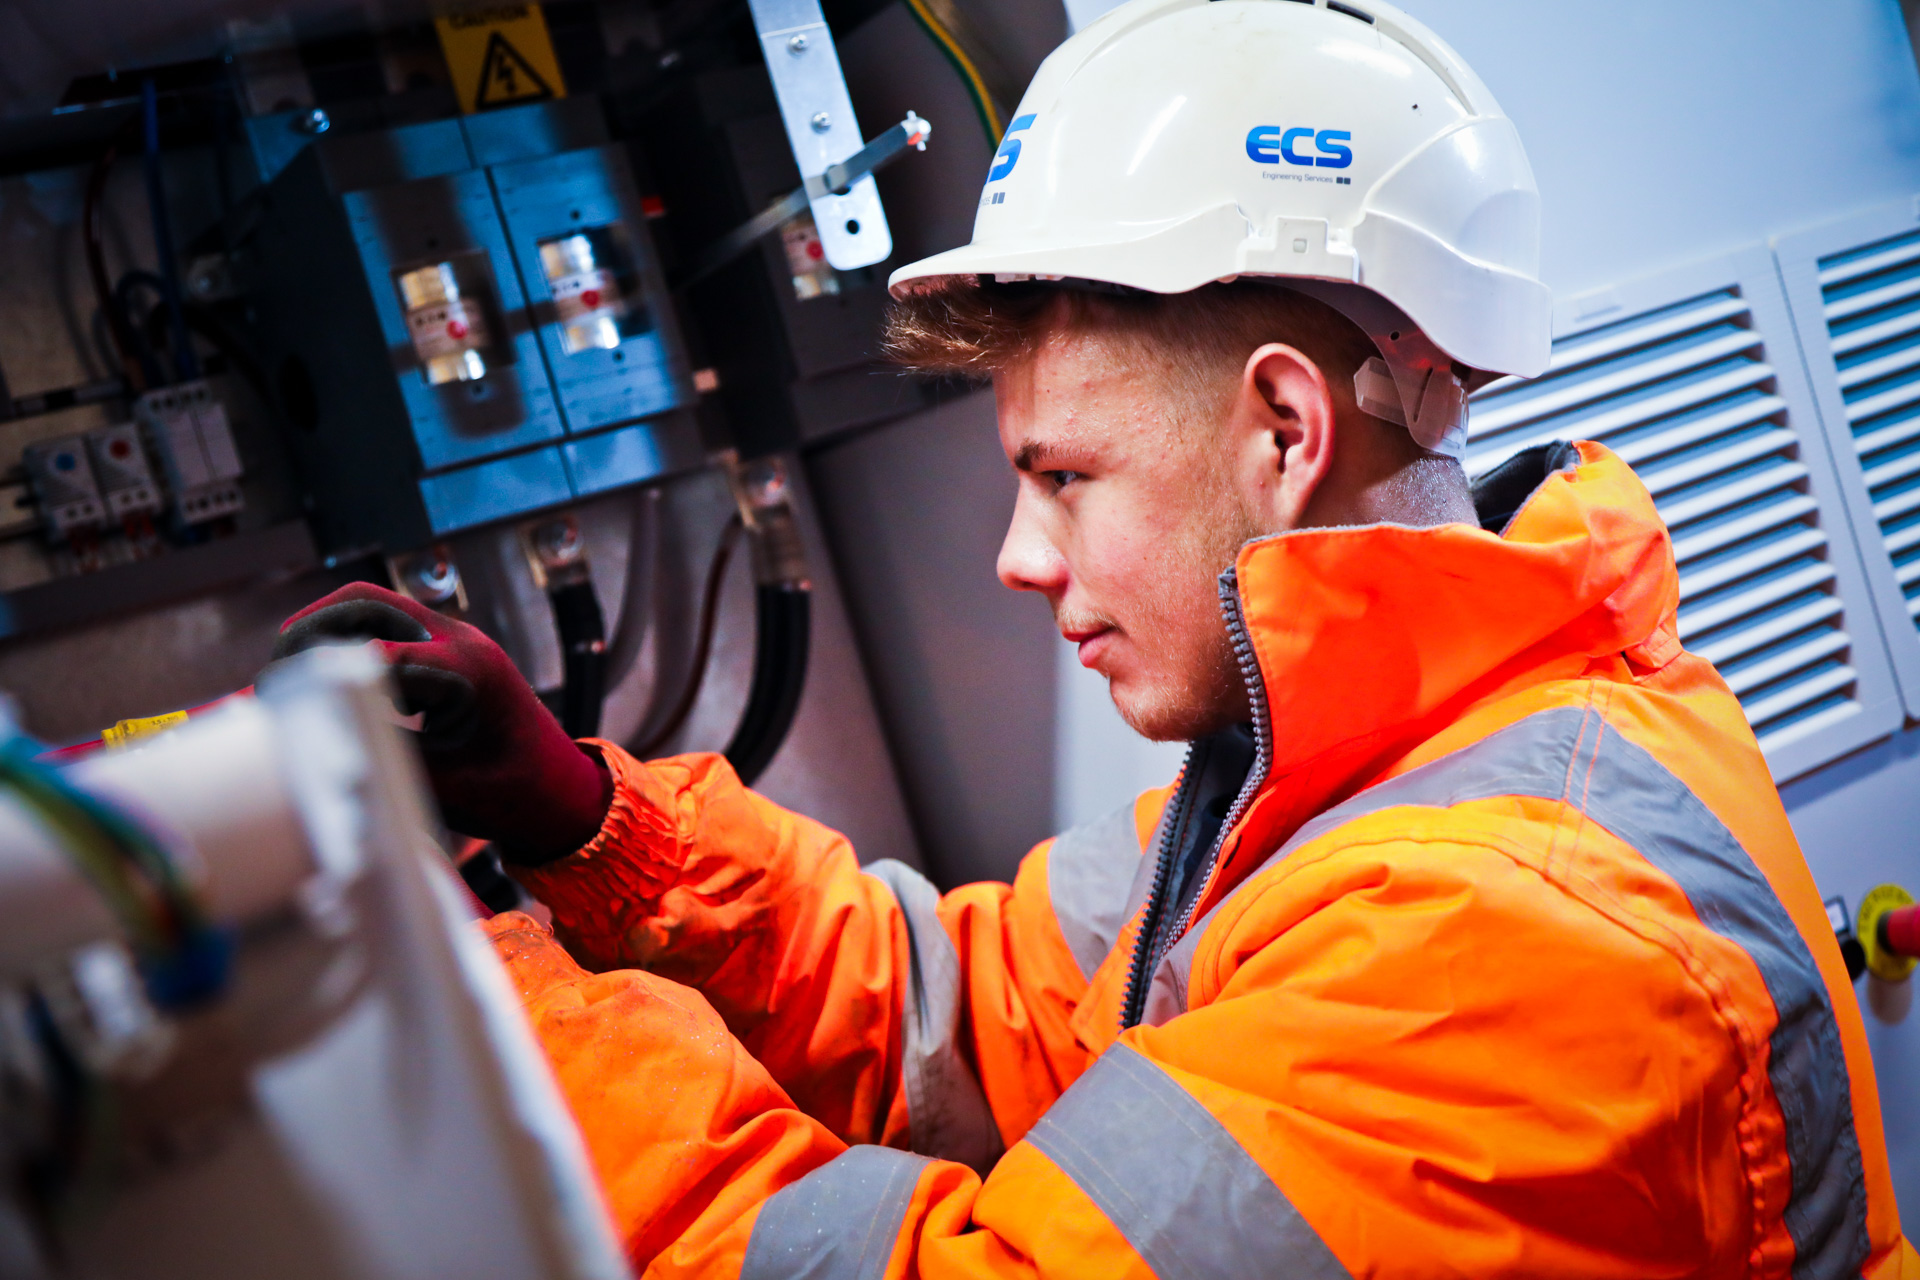 Severn Trent Water has appointed ECS Engineering Services as a framework contractor for mechanical services in all regions.